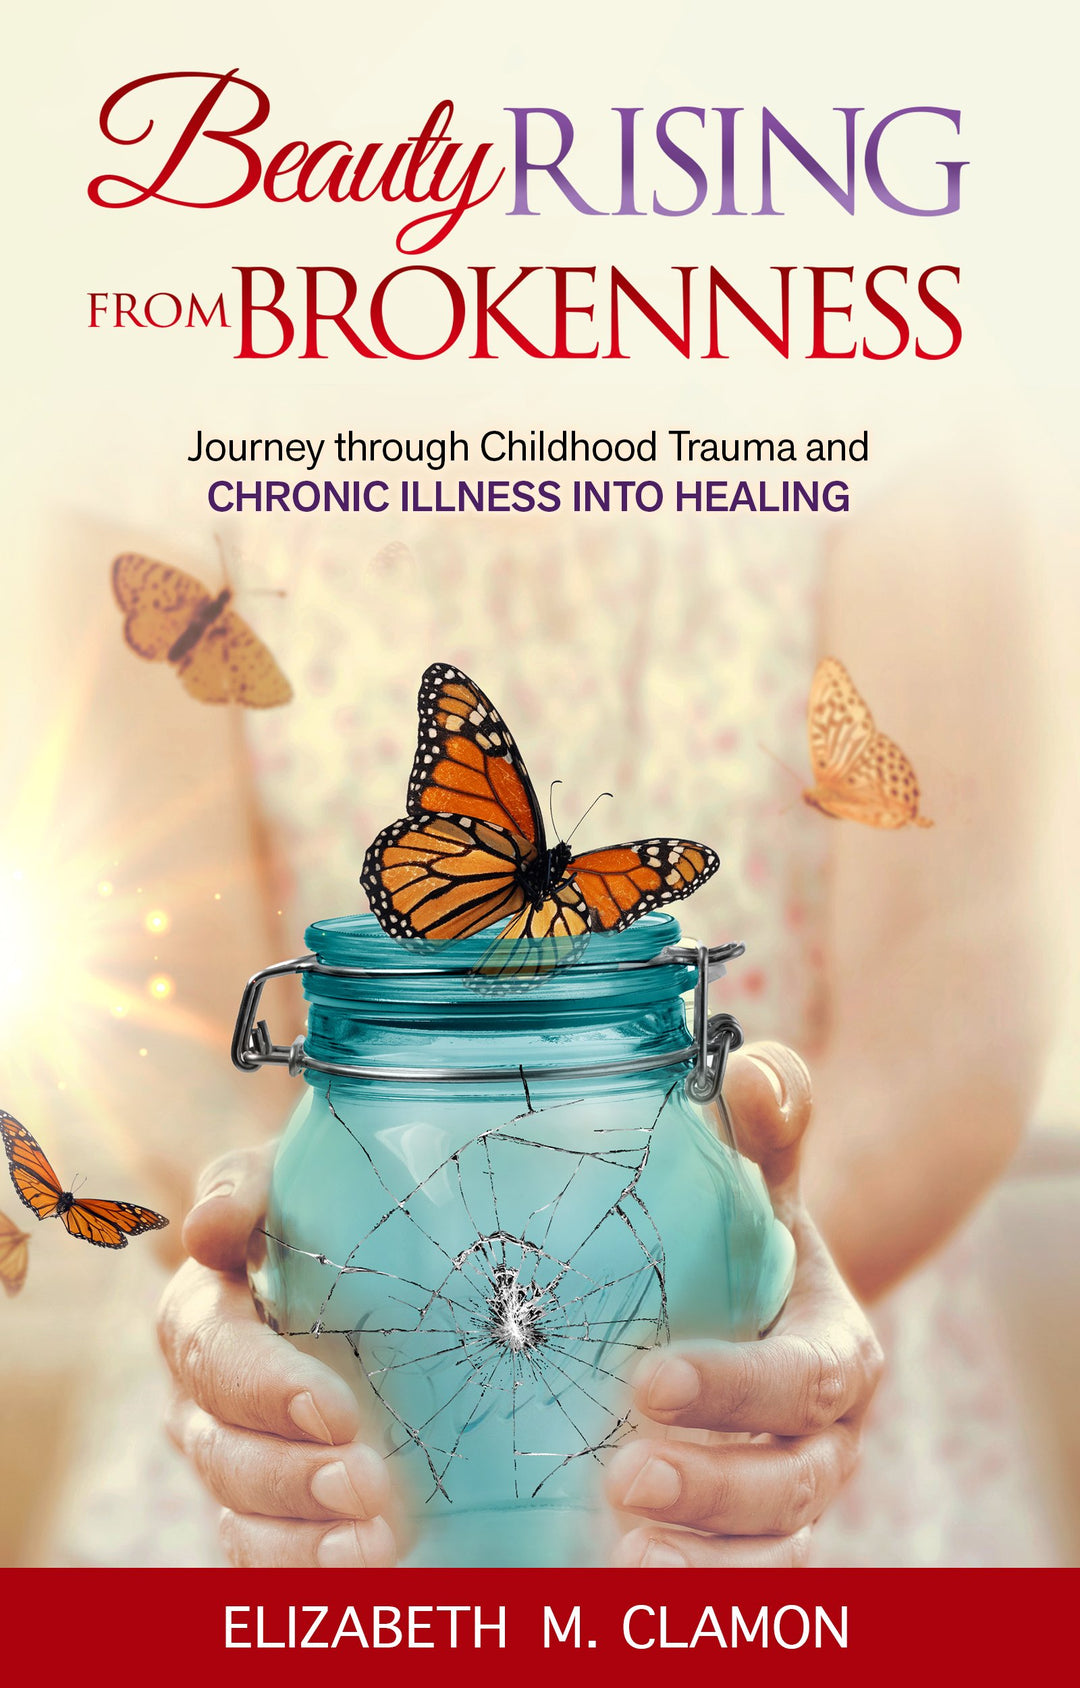 Beauty Rising from Brokenness